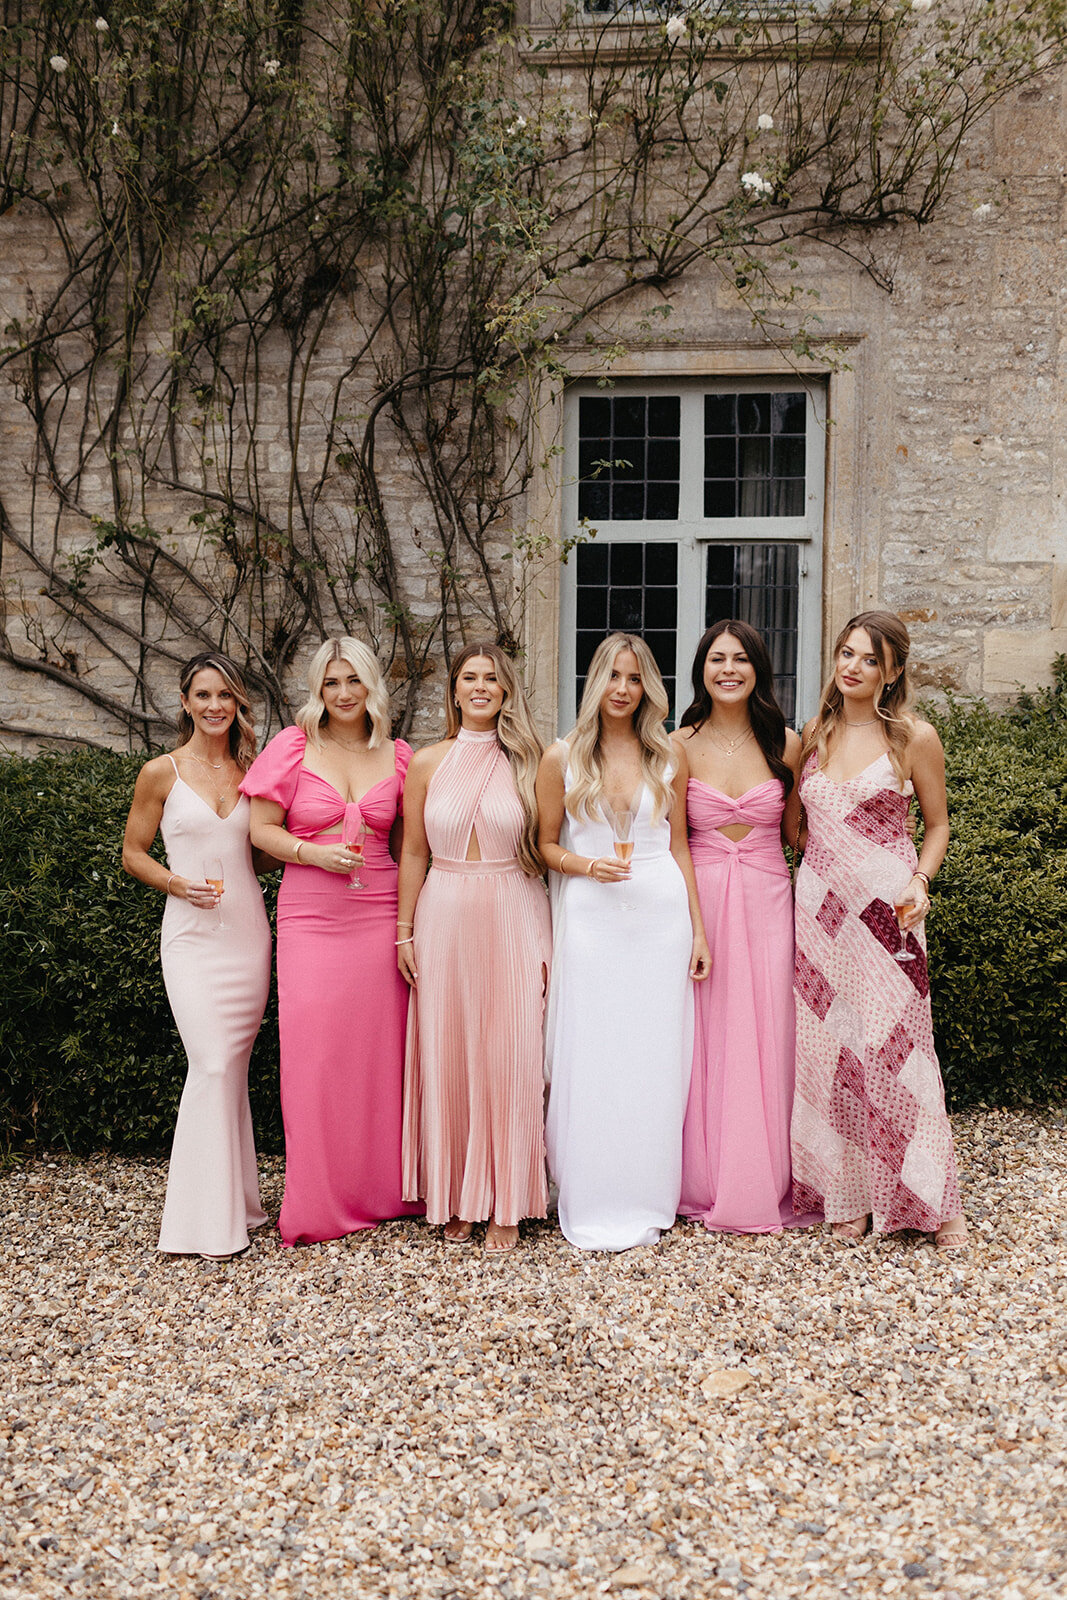 Attabara Studio UK Luxury Wedding Planners Private Estate Marquee Wedding with Rebecca Rees1 Attabara Studio UK Luxury Wedding Planners Private Estate Marquee Wedding with Rebecca Rees0